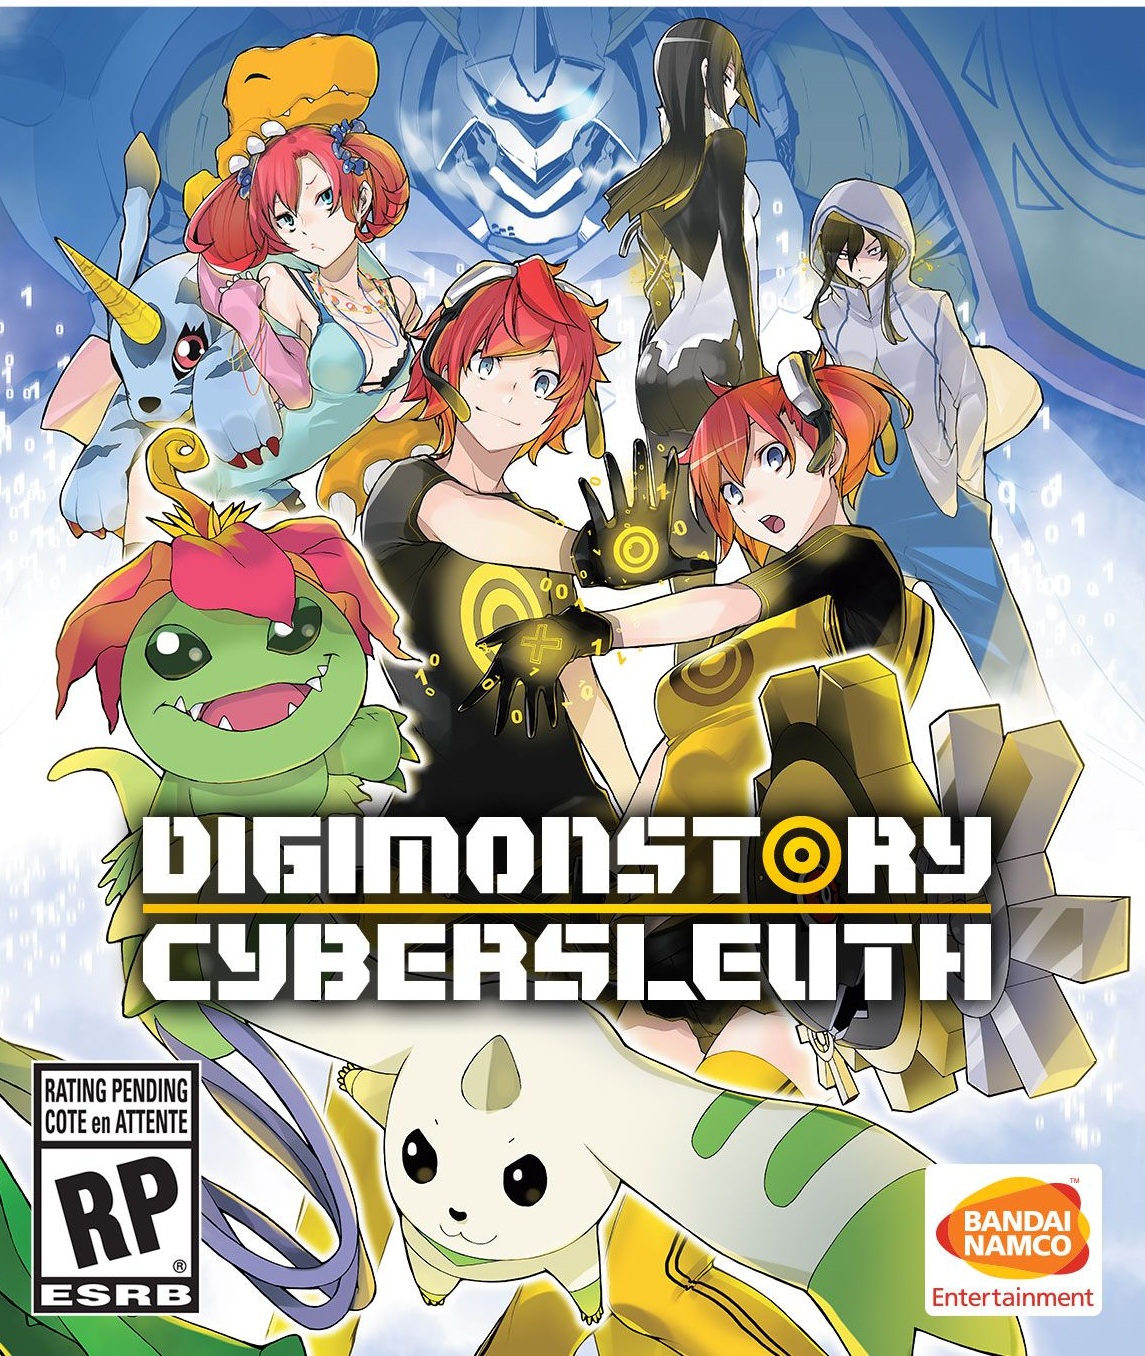 Digimon Story Cyber Sleuth Free Download Hienzo.com